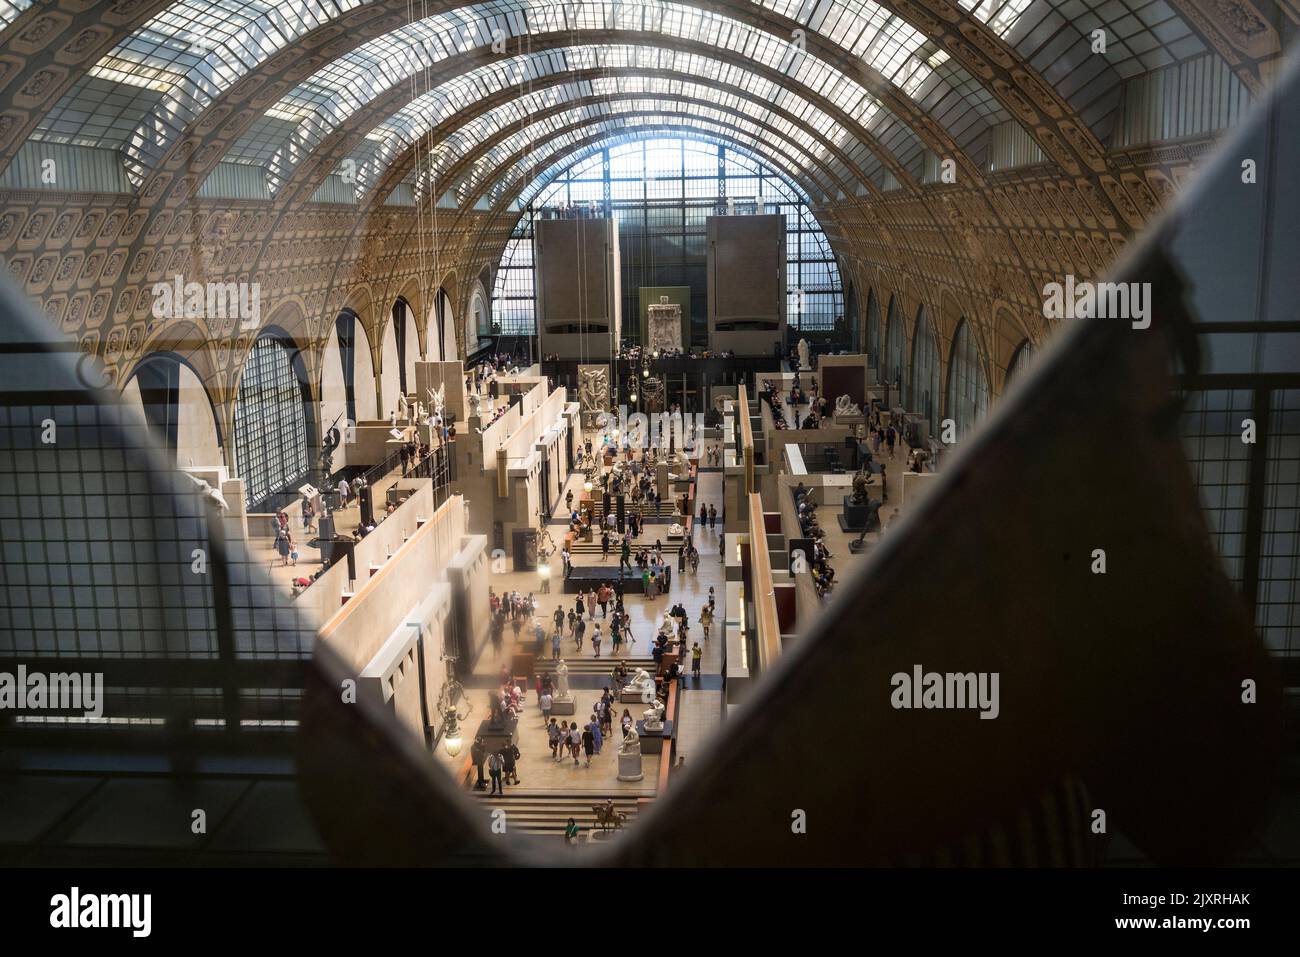 Musée d'Orsay, housed in the former Gare d'Orsay, a Beaux-Arts railway station. The museum holds mainly French art dating from 1848 to 1914, Paris, Fr Stock Photo